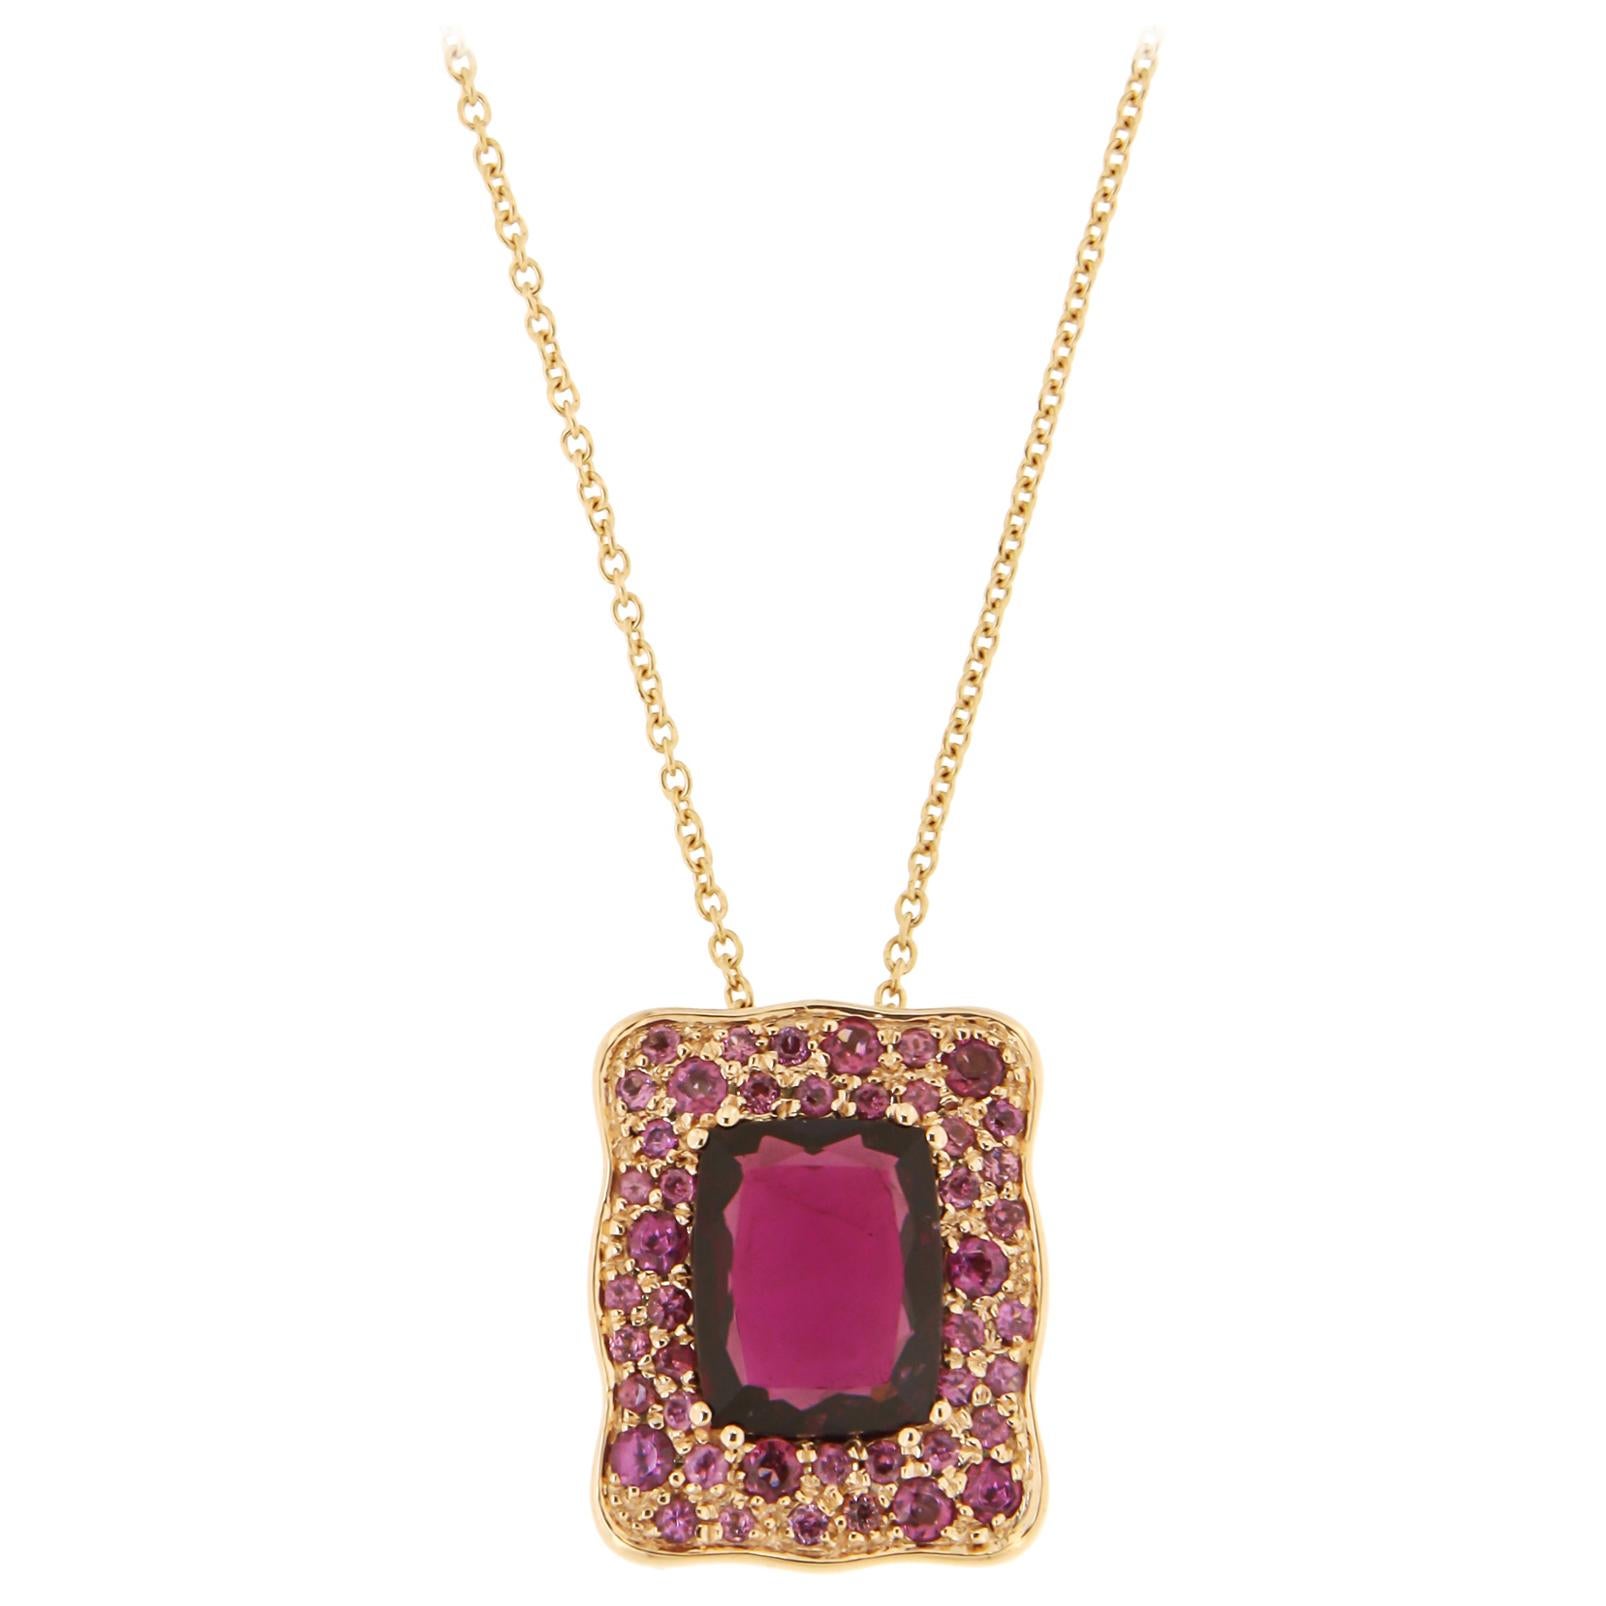 Stylish 18k Rhodolite Rose Gold Pendant Necklace for Her Made in Italy